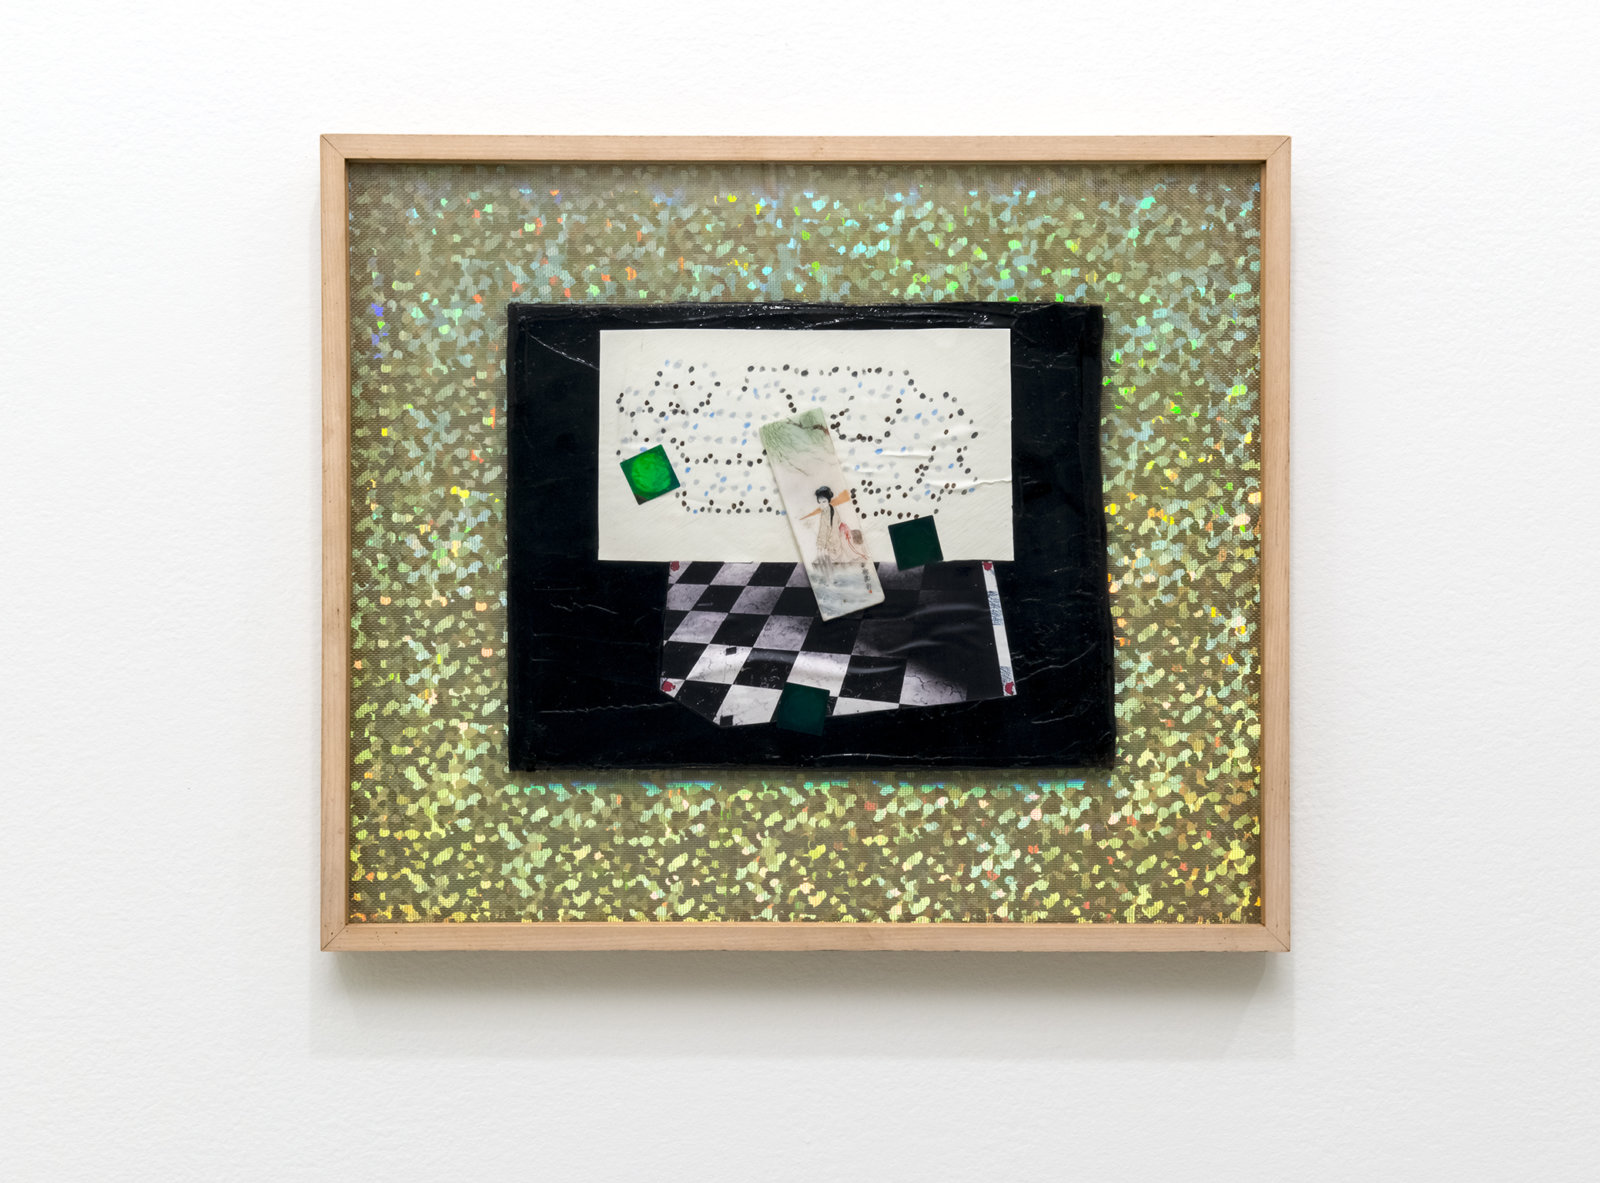 Jerry Pethick, Duchamp Theatre, 2000–2002, collage elements, drawing, found objects, silver diffraction grating, silicone, dimensions variable